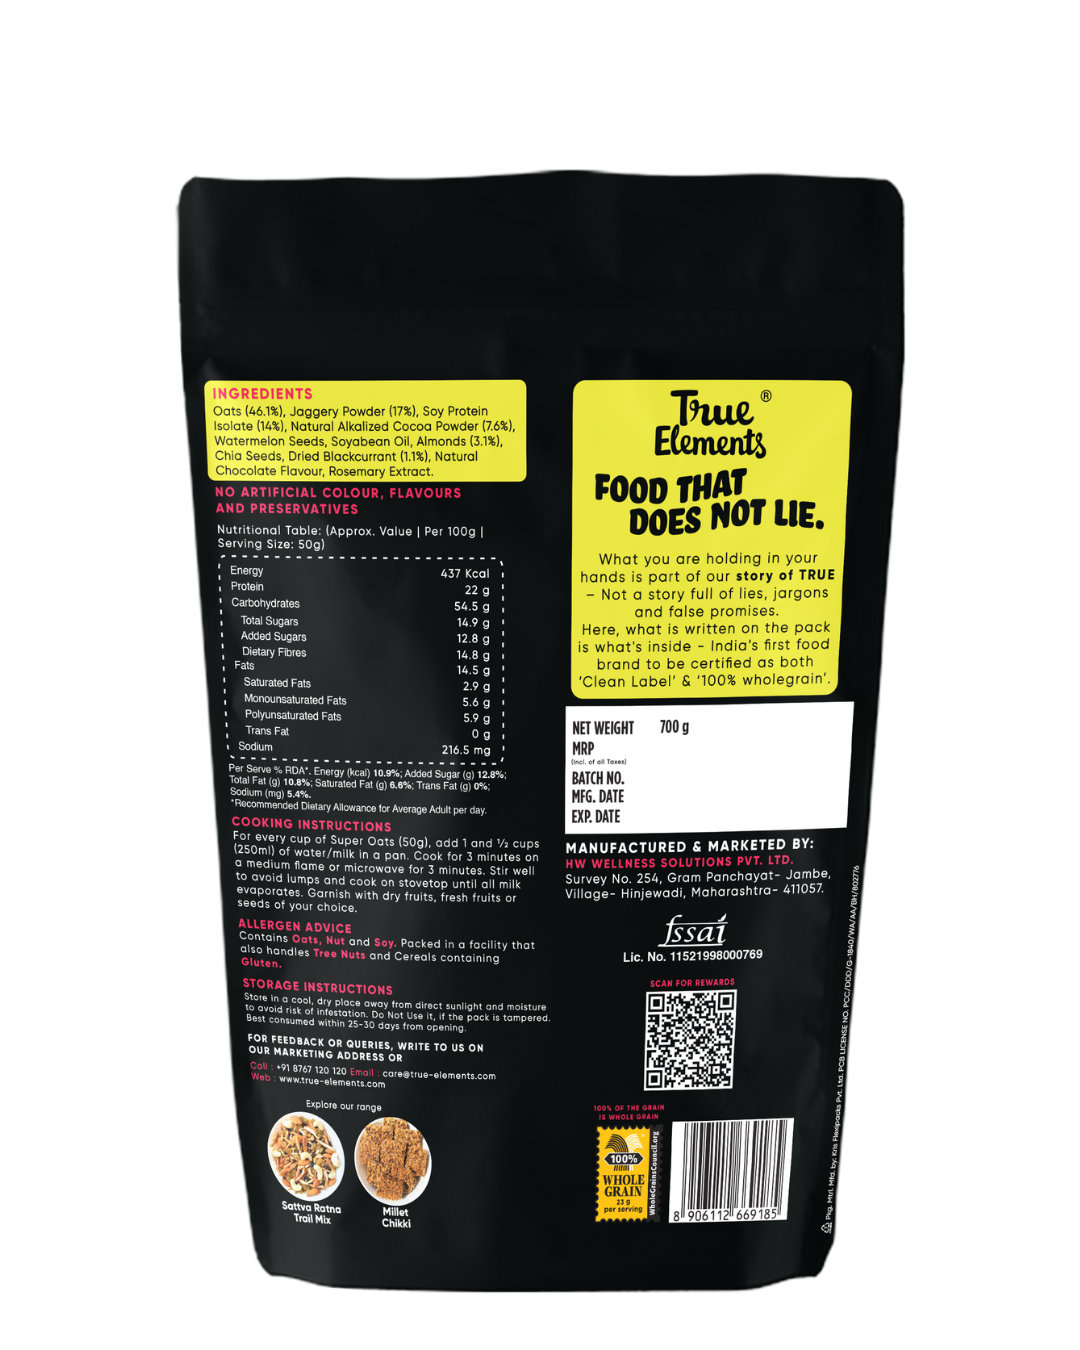 Protein Oats Dark Chocolate 700g  - (Contains 22g Protein)